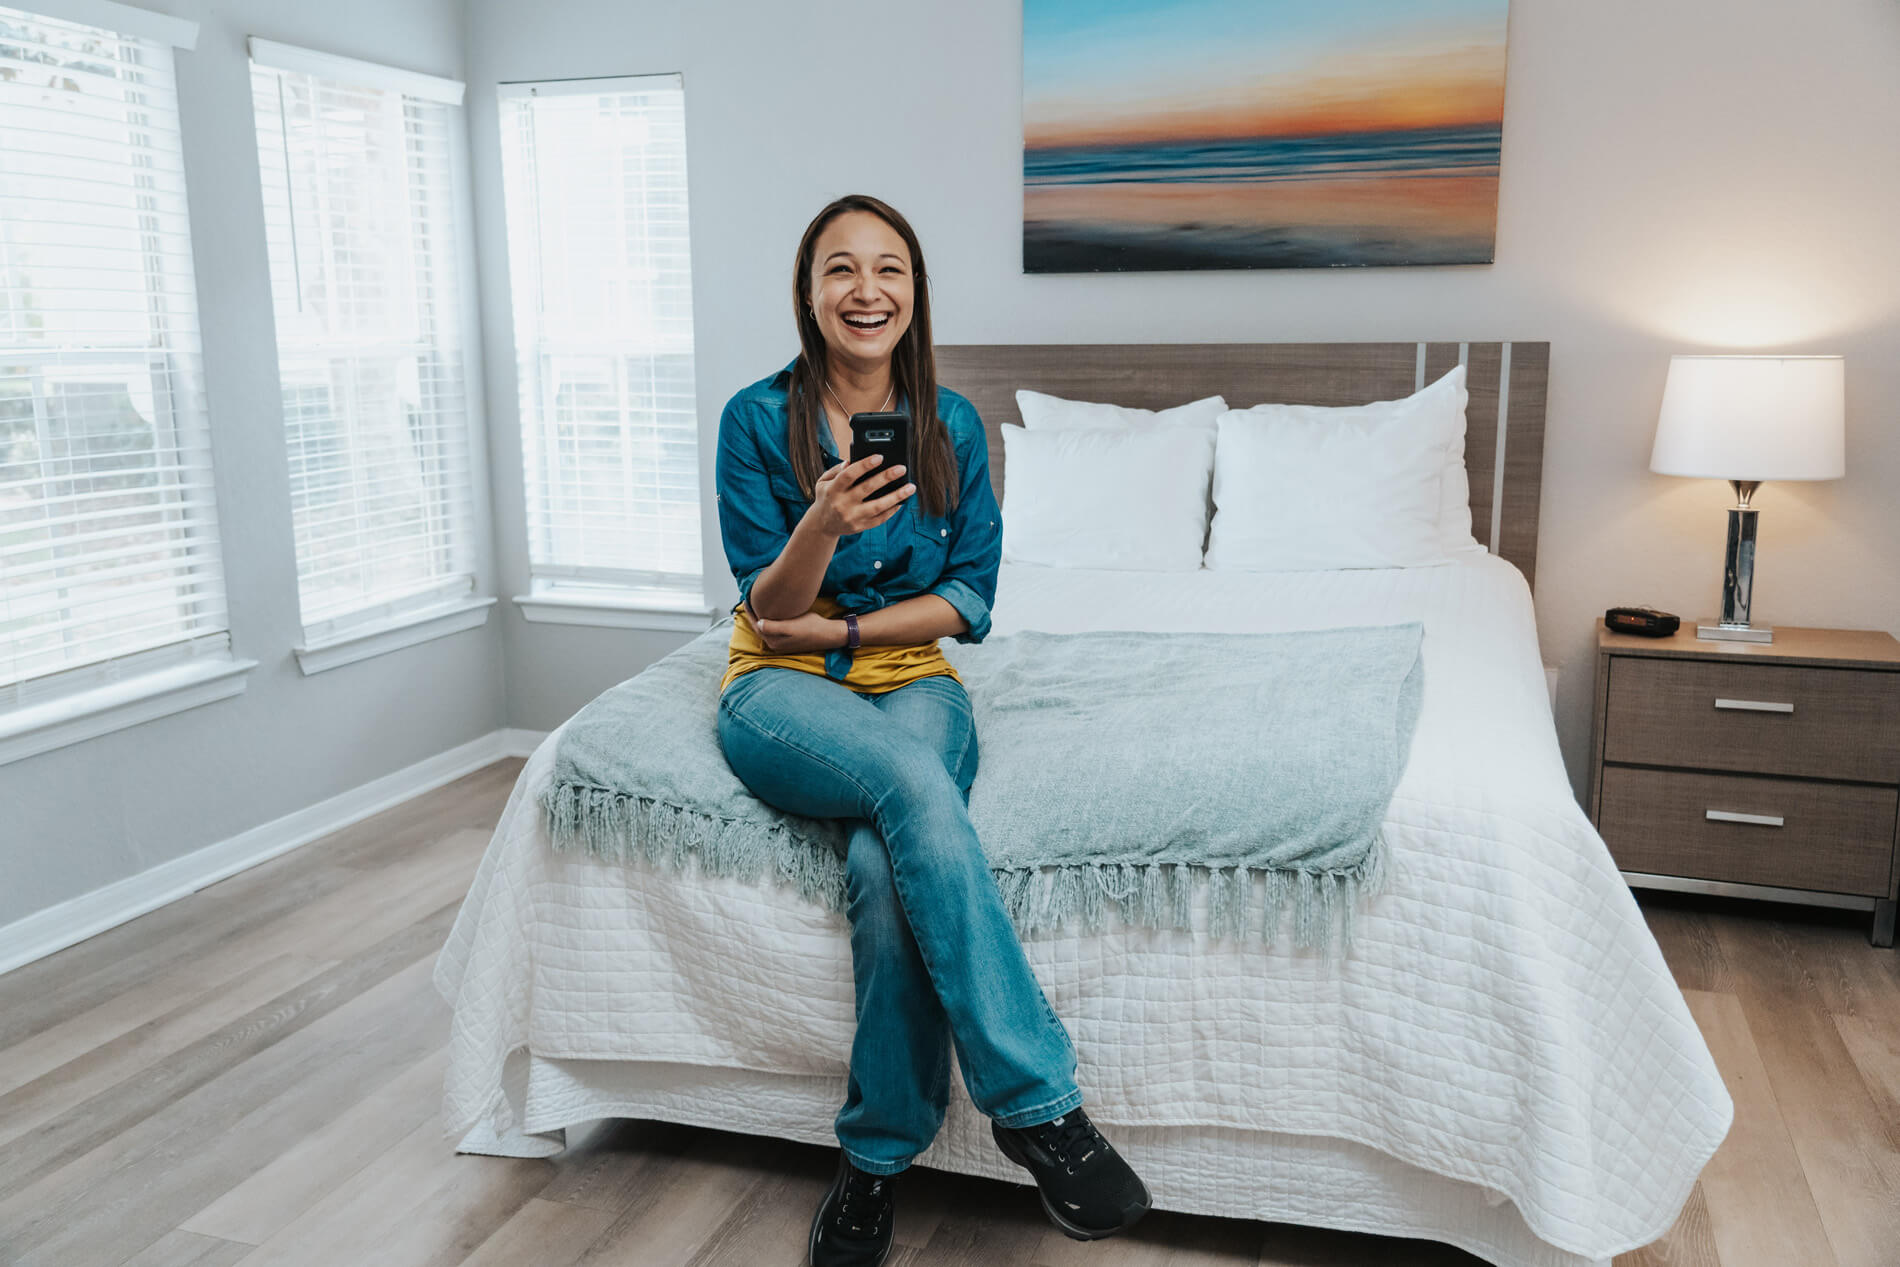 Arbors At Maitland woman plays on a phone in a staged bedroom